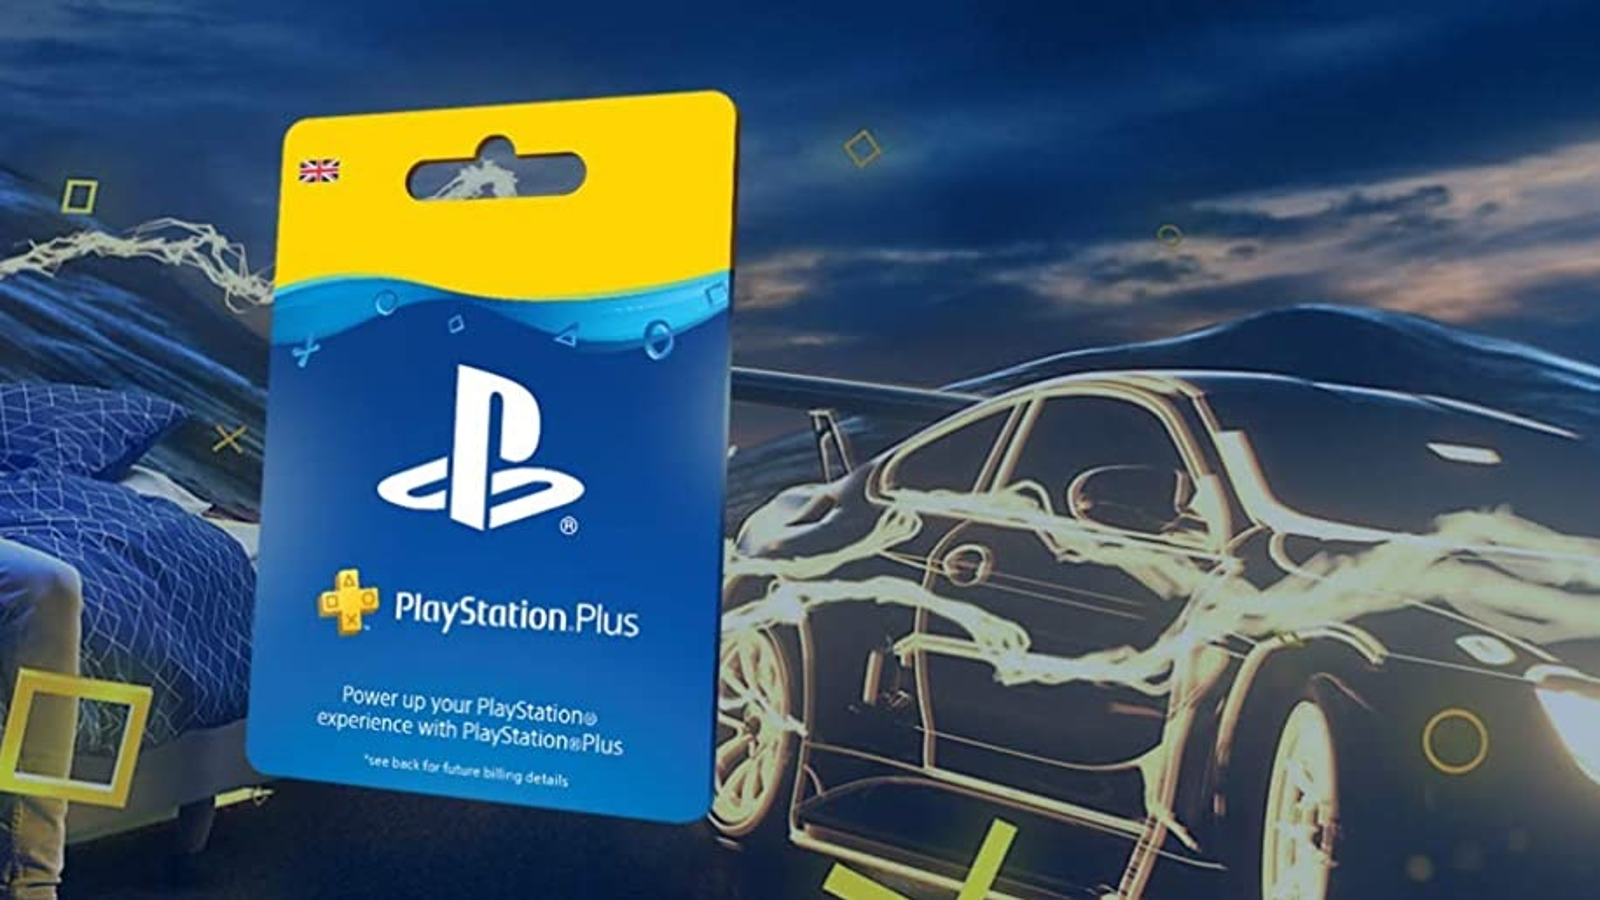 Where to Get PS Plus Cheap for Black Friday